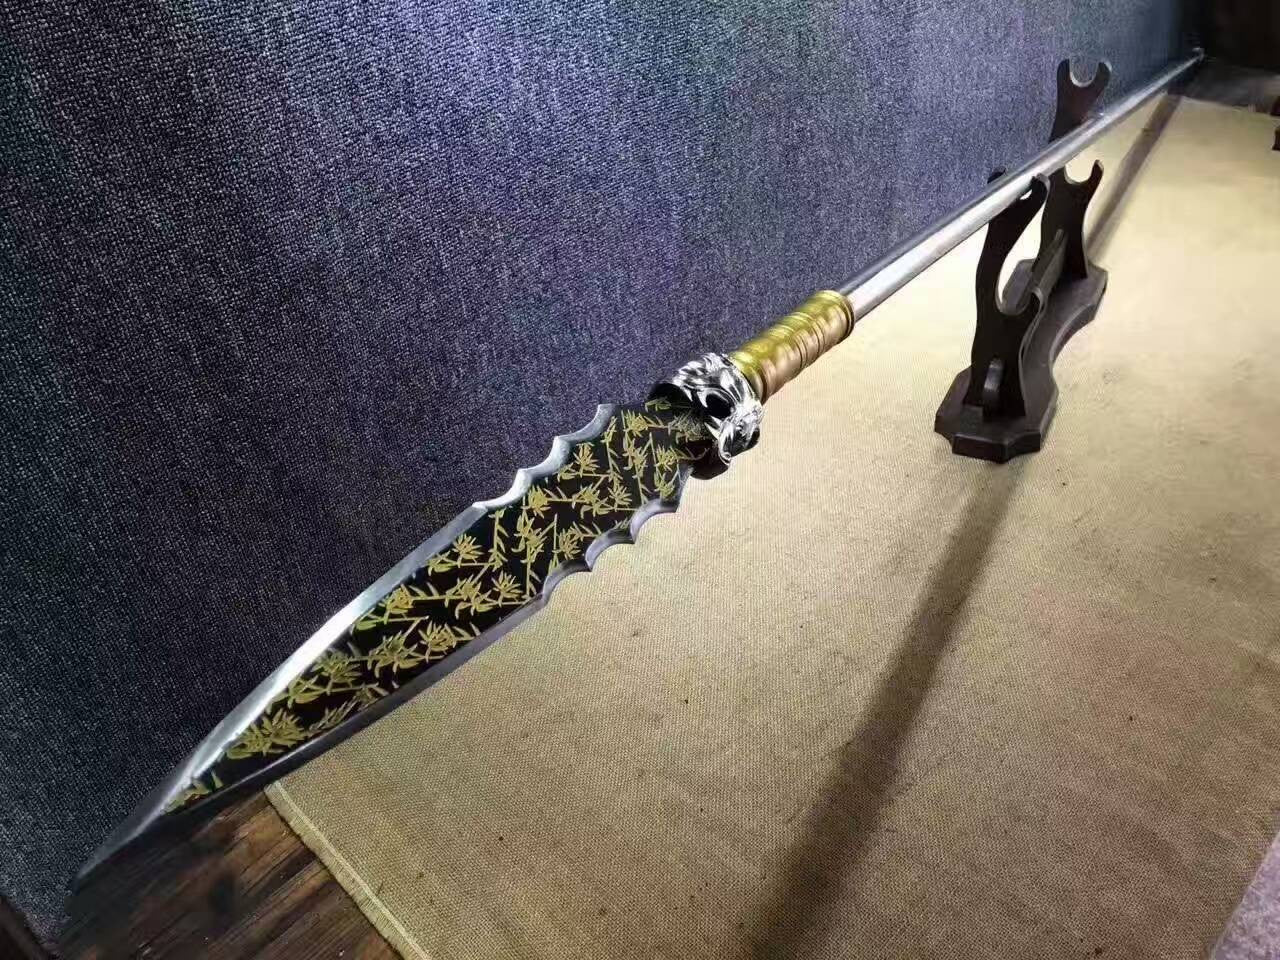 Dragon lance/Overlord Spear/High manganese steel Spearhead,Stainless steel rod,Length 78 inch - Chinese sword shop